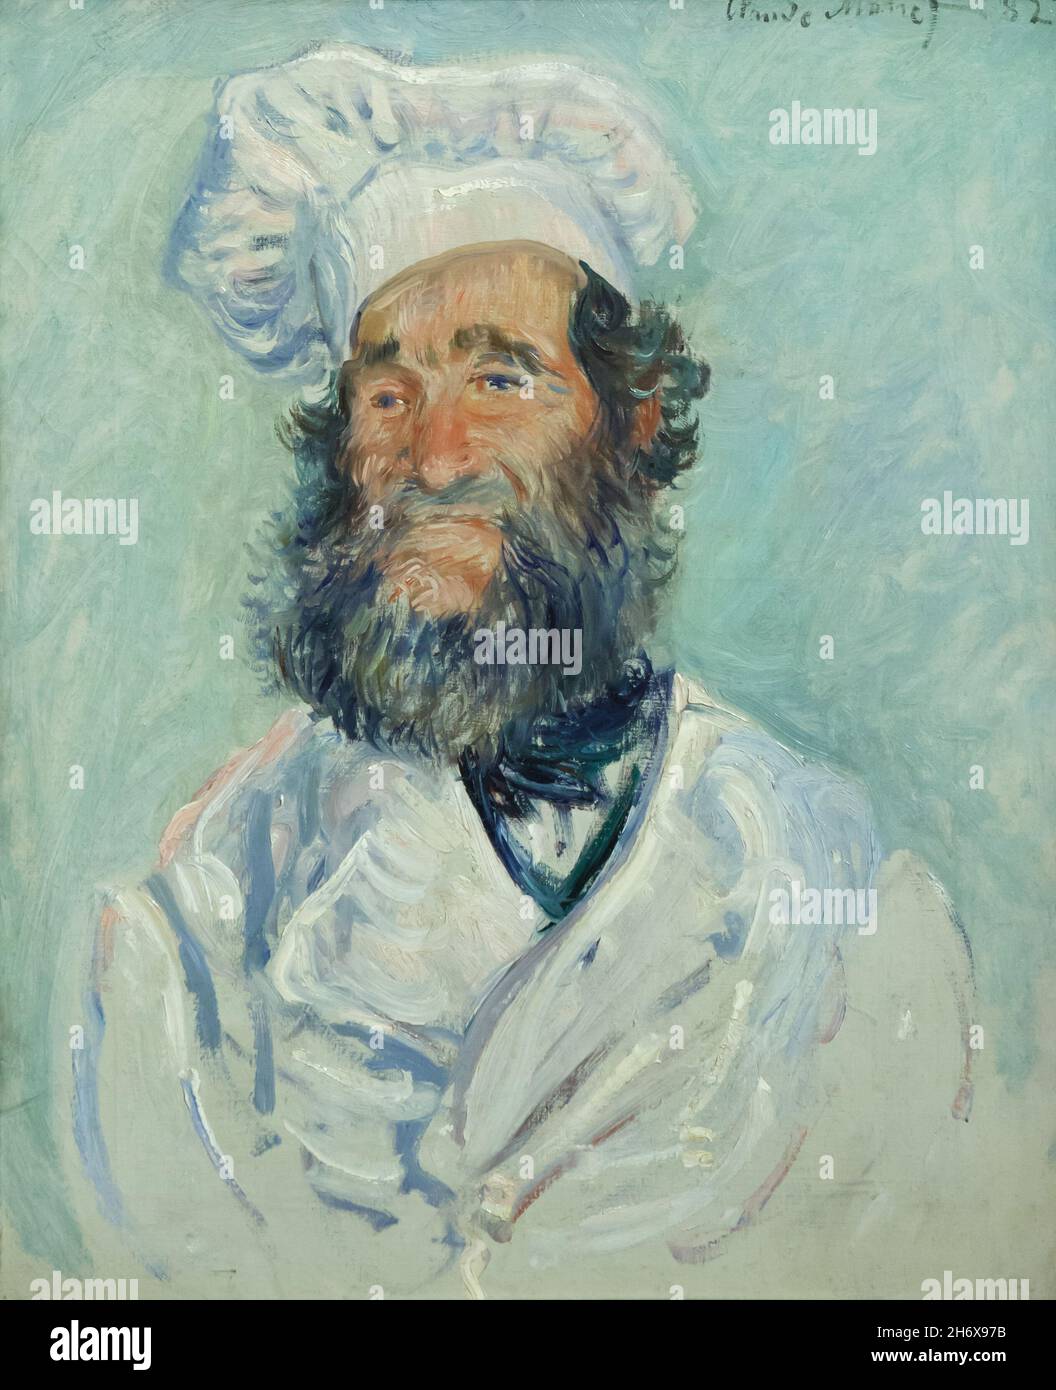 Painting 'The Chef' ('Le Père Paul') by French Impressionist painter Claude Monet (1882) on display in the Belvedere Museum in Vienna, Austria. Chef Paul Antoine Graff is depicted in the portrait. Stock Photo